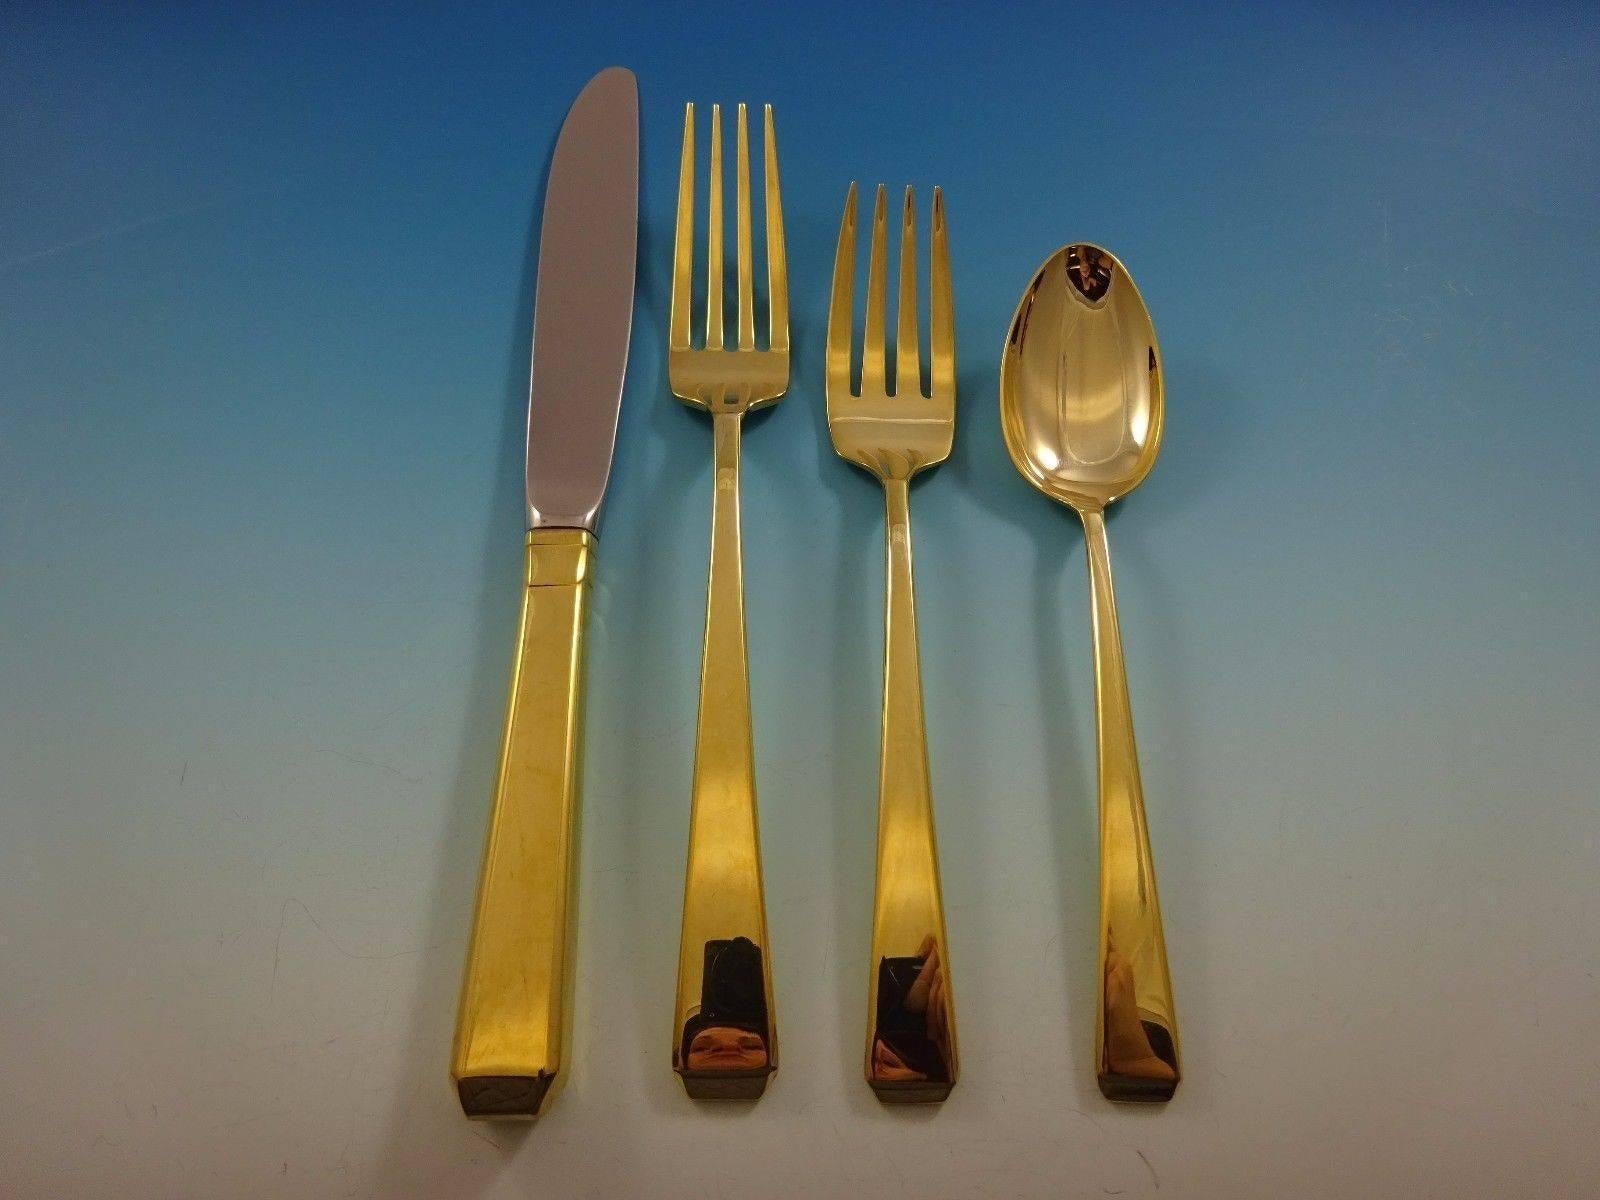 Craftsman gold by Towle sterling silver flatware set - 24 pieces. Gold flatware is on trend and makes a bold statement on your table. This set is vermeil (completely gold-washed) and includes: 

Six knives, 8 5/8